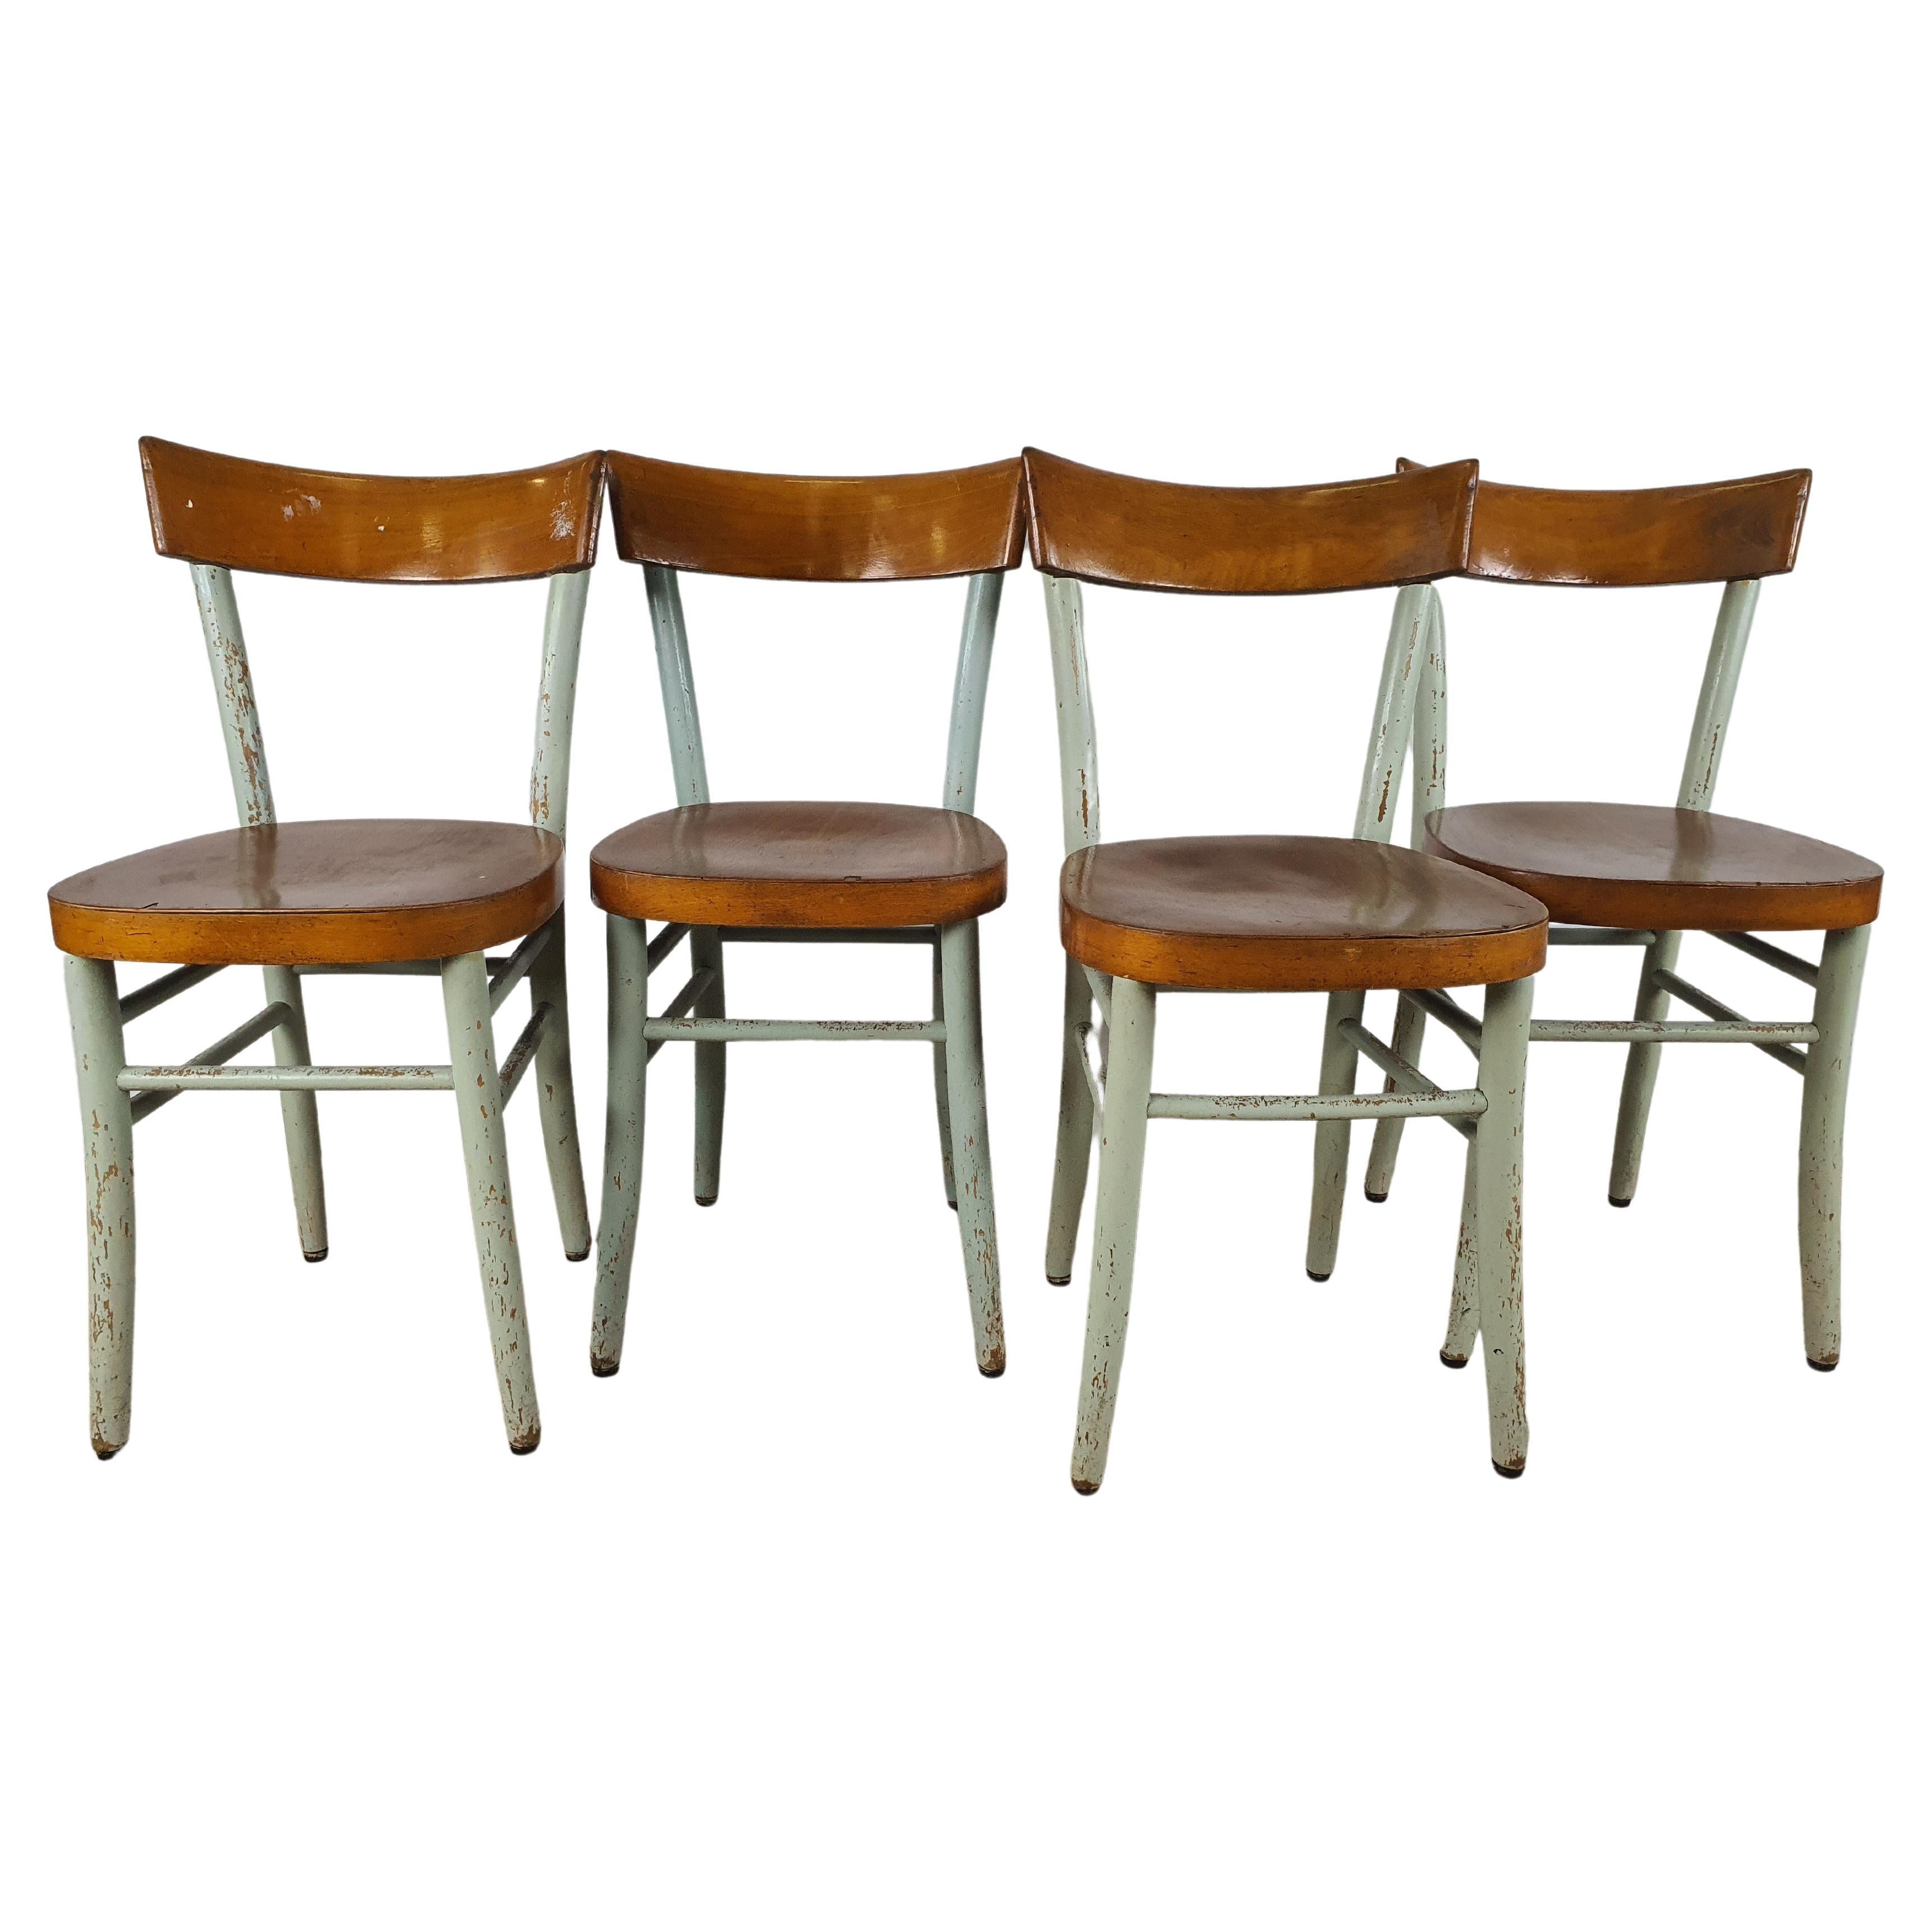 Set of 4 Country Chic Bistro Chairs